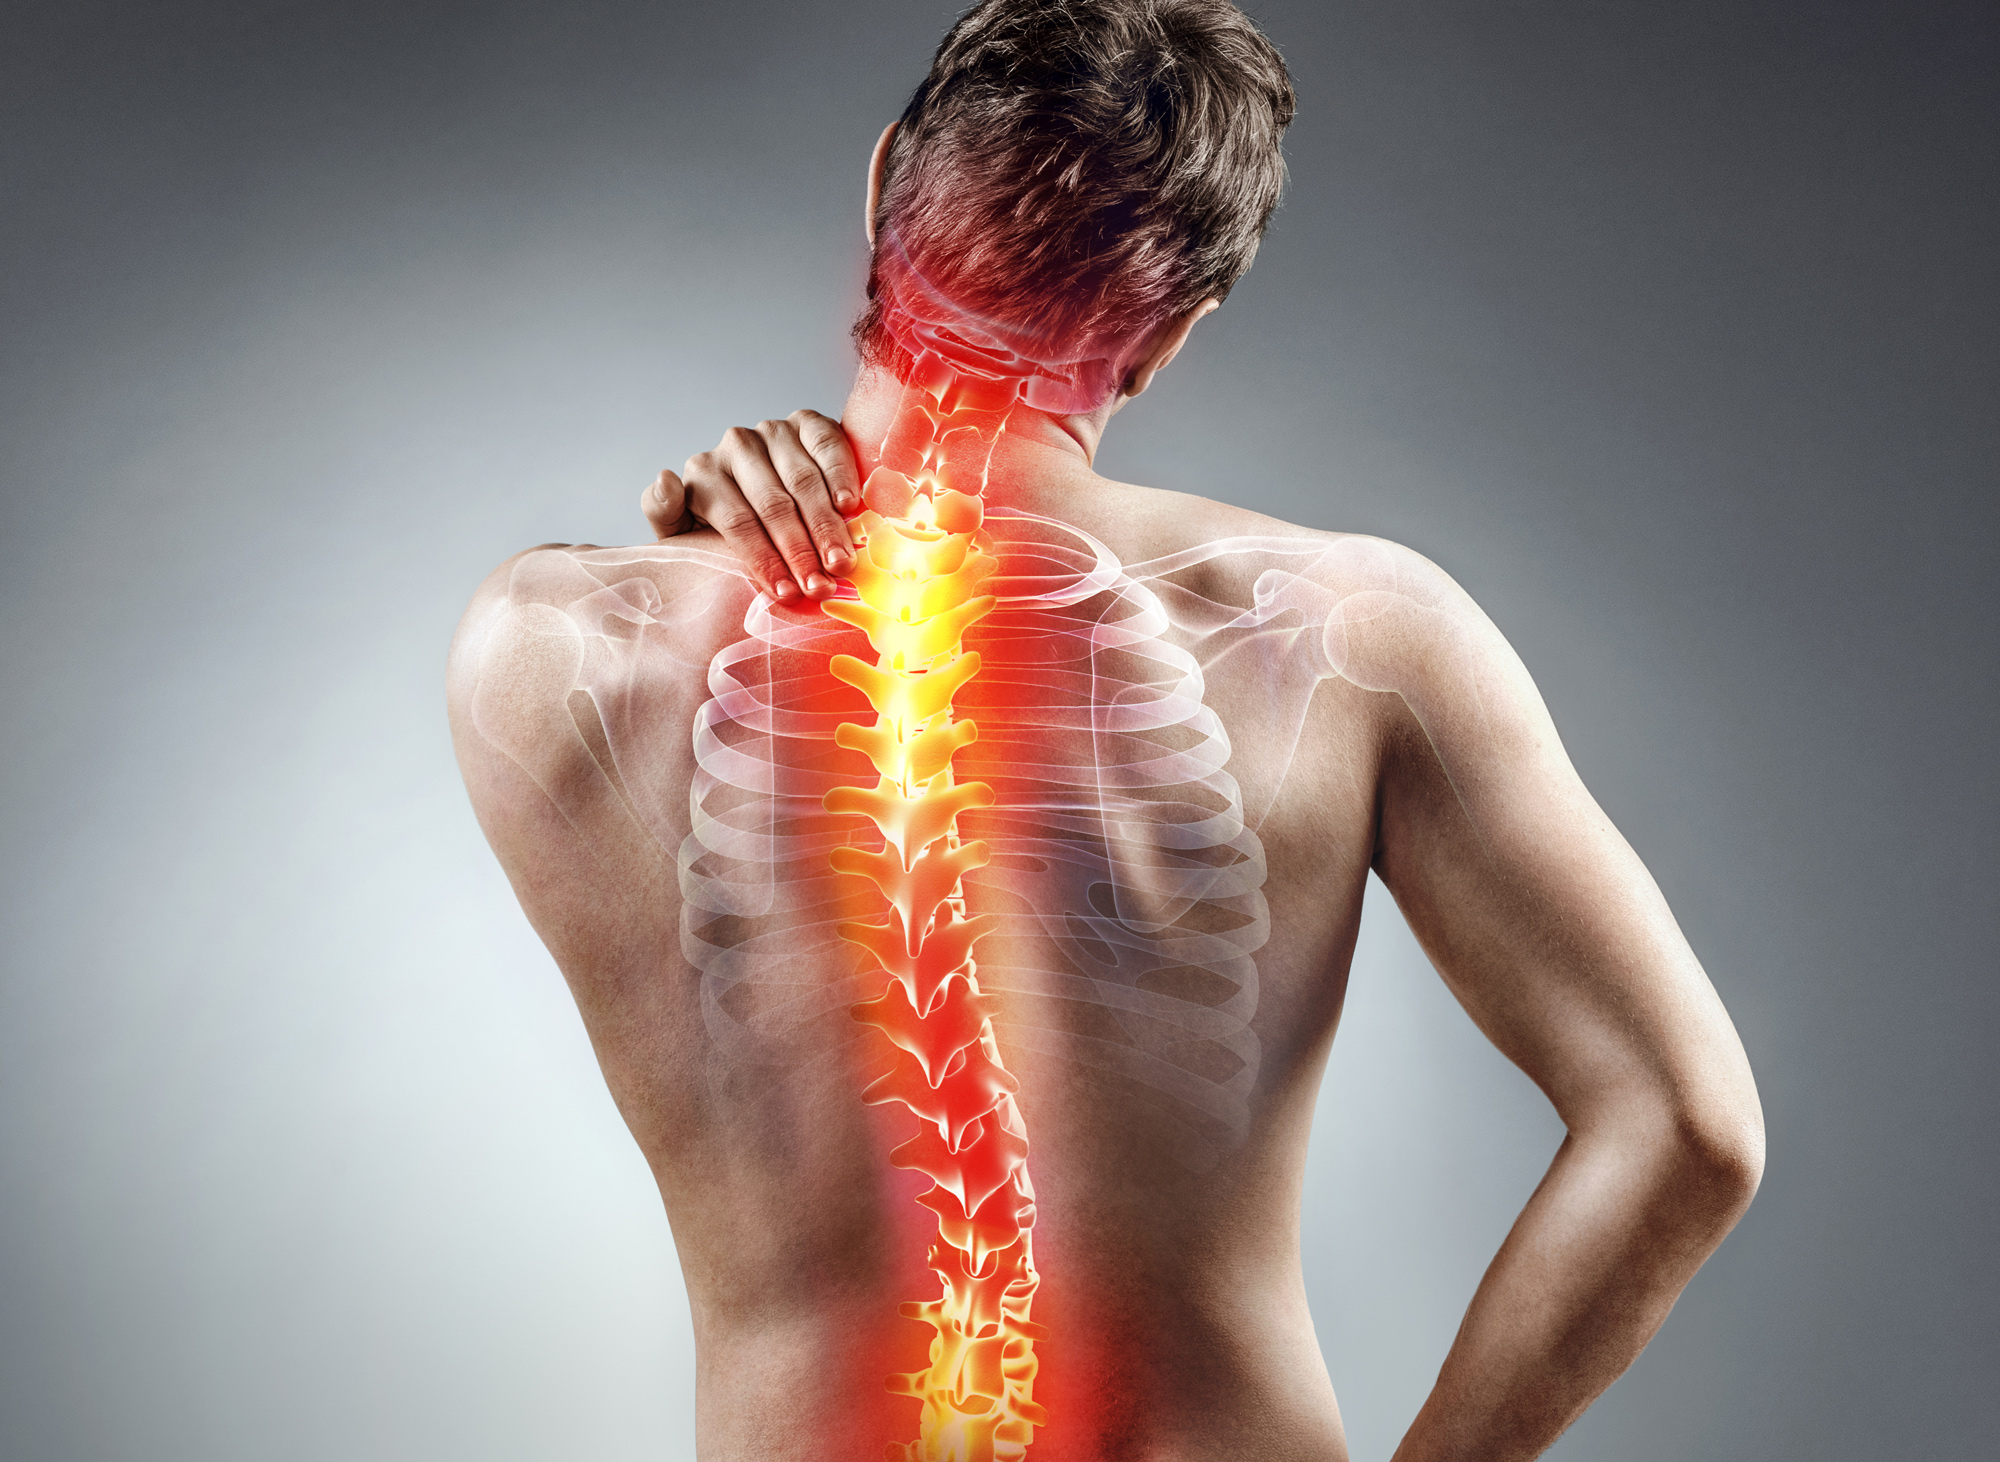 Relief for Symptoms of Scoliosis